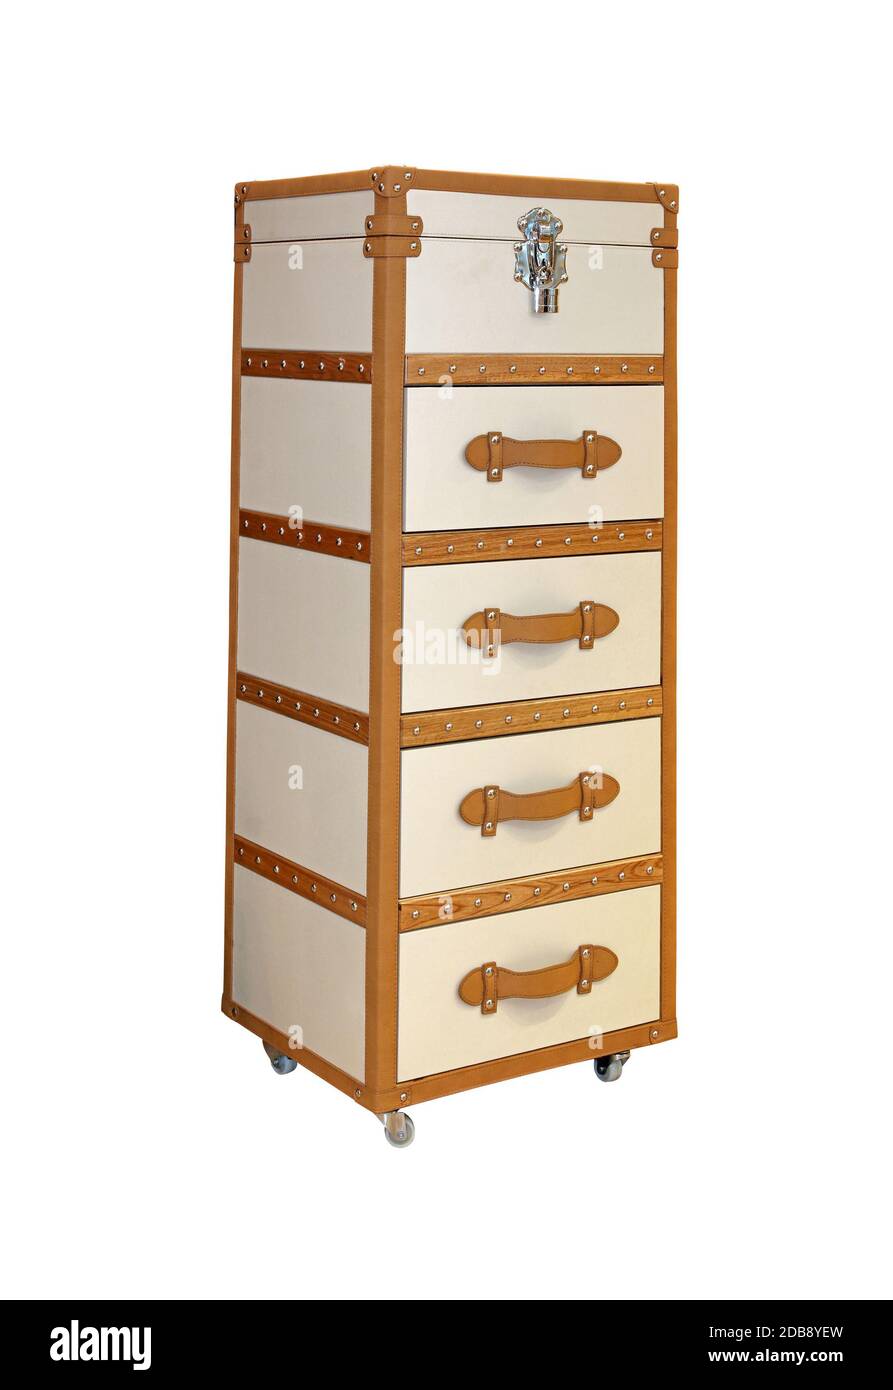 Retro wardrobe case isolated with clipping path included Stock Photo